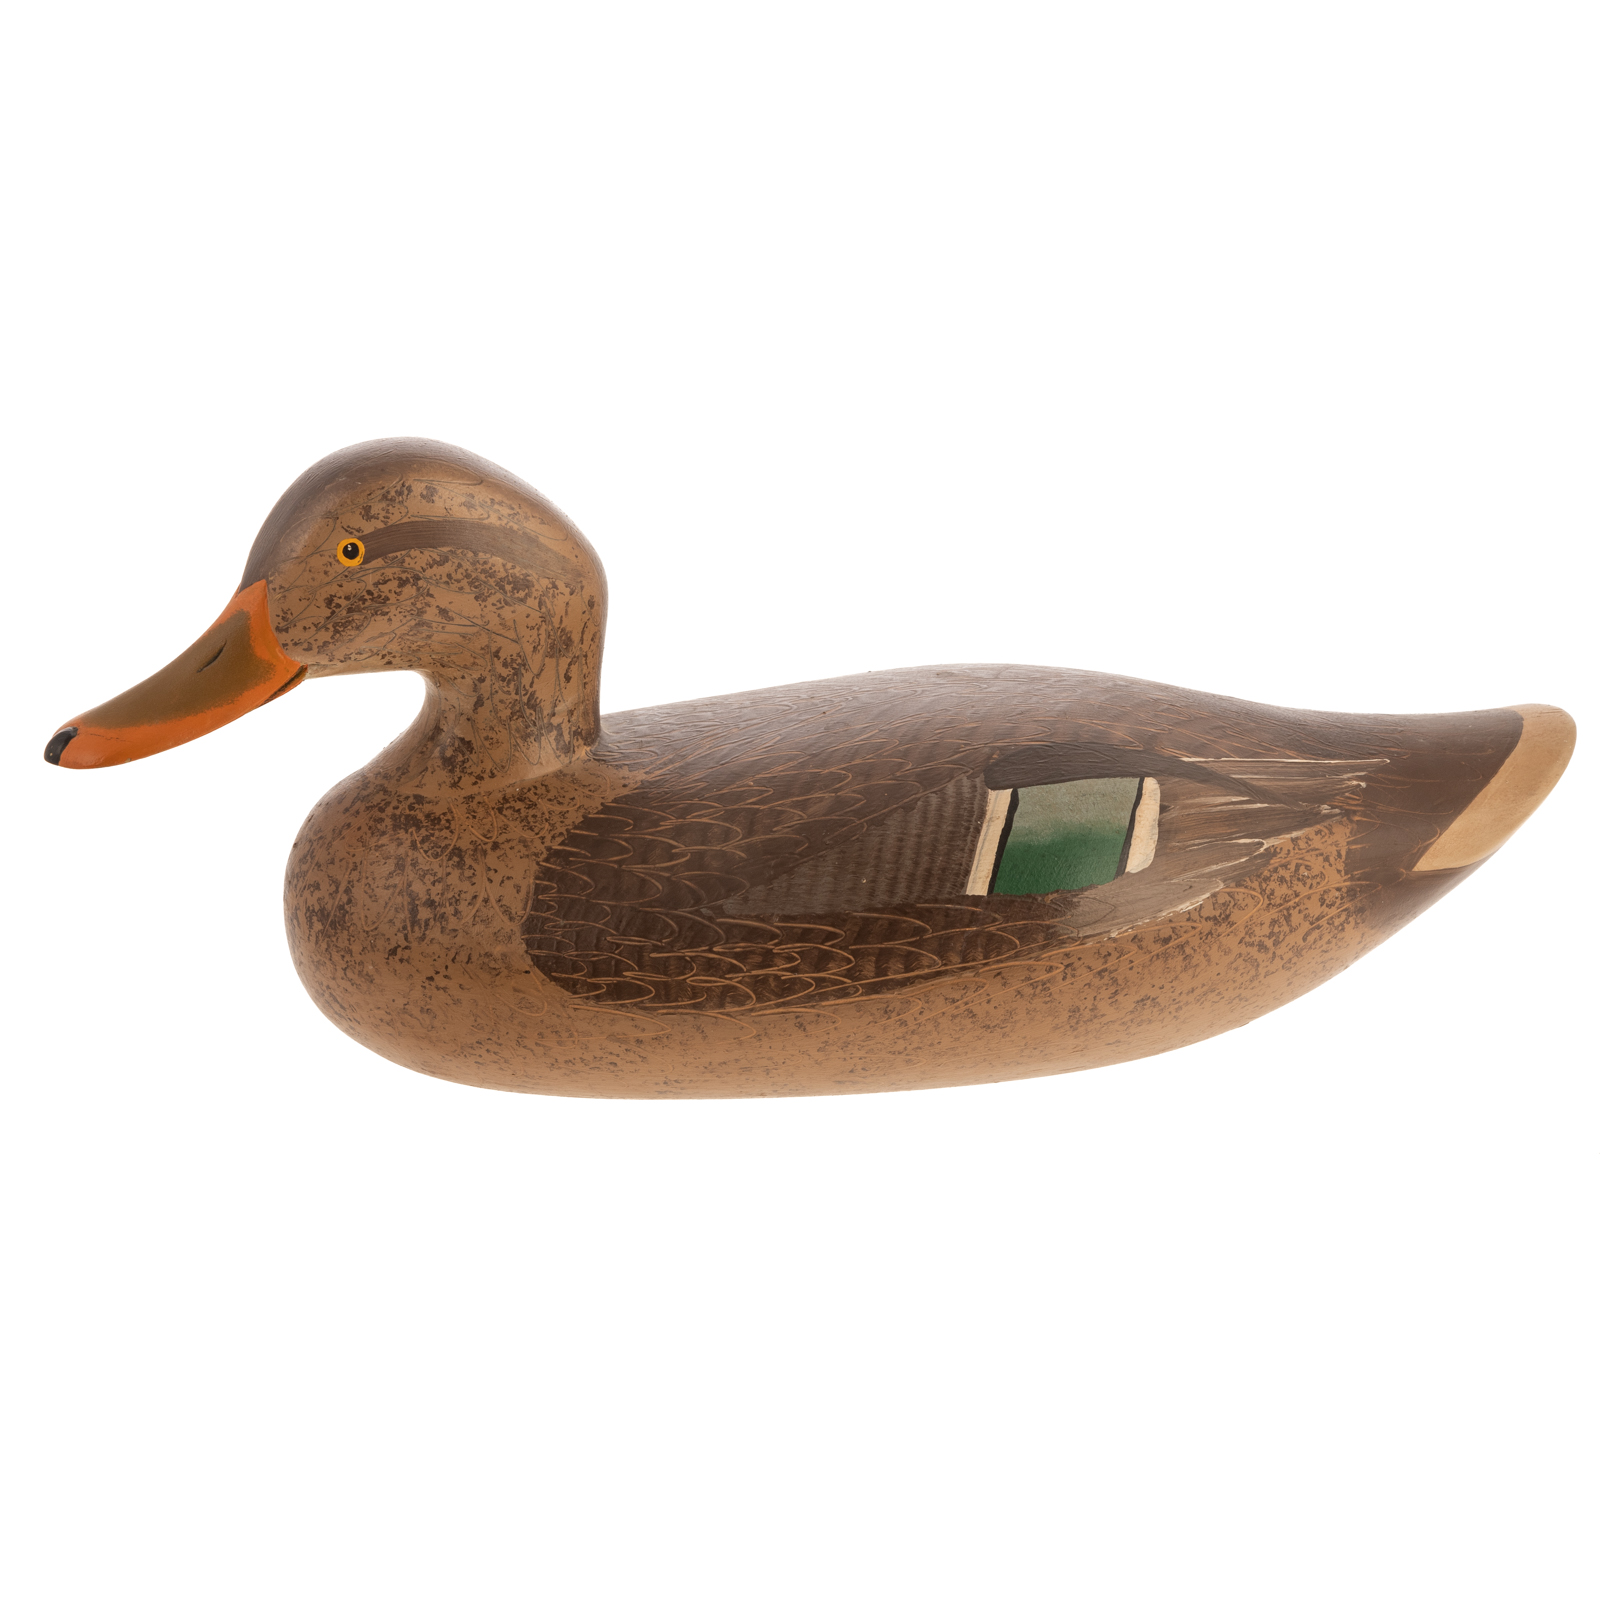 R. MADISON MITCHELL, DUCK DECOY Dated